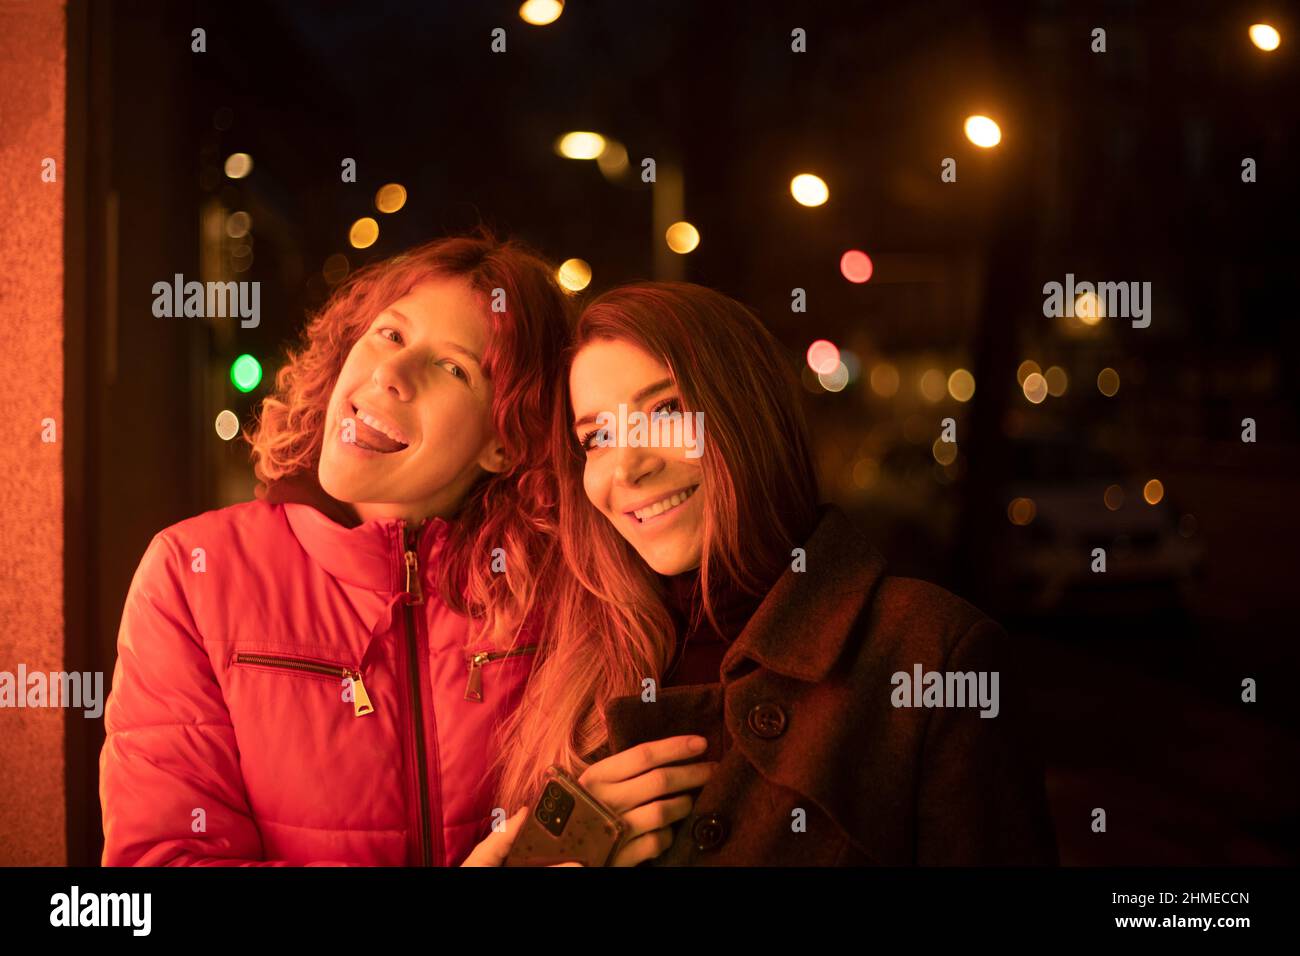 couple of women at night looking at the camera happily illuminated with shop window lights Stock Photo